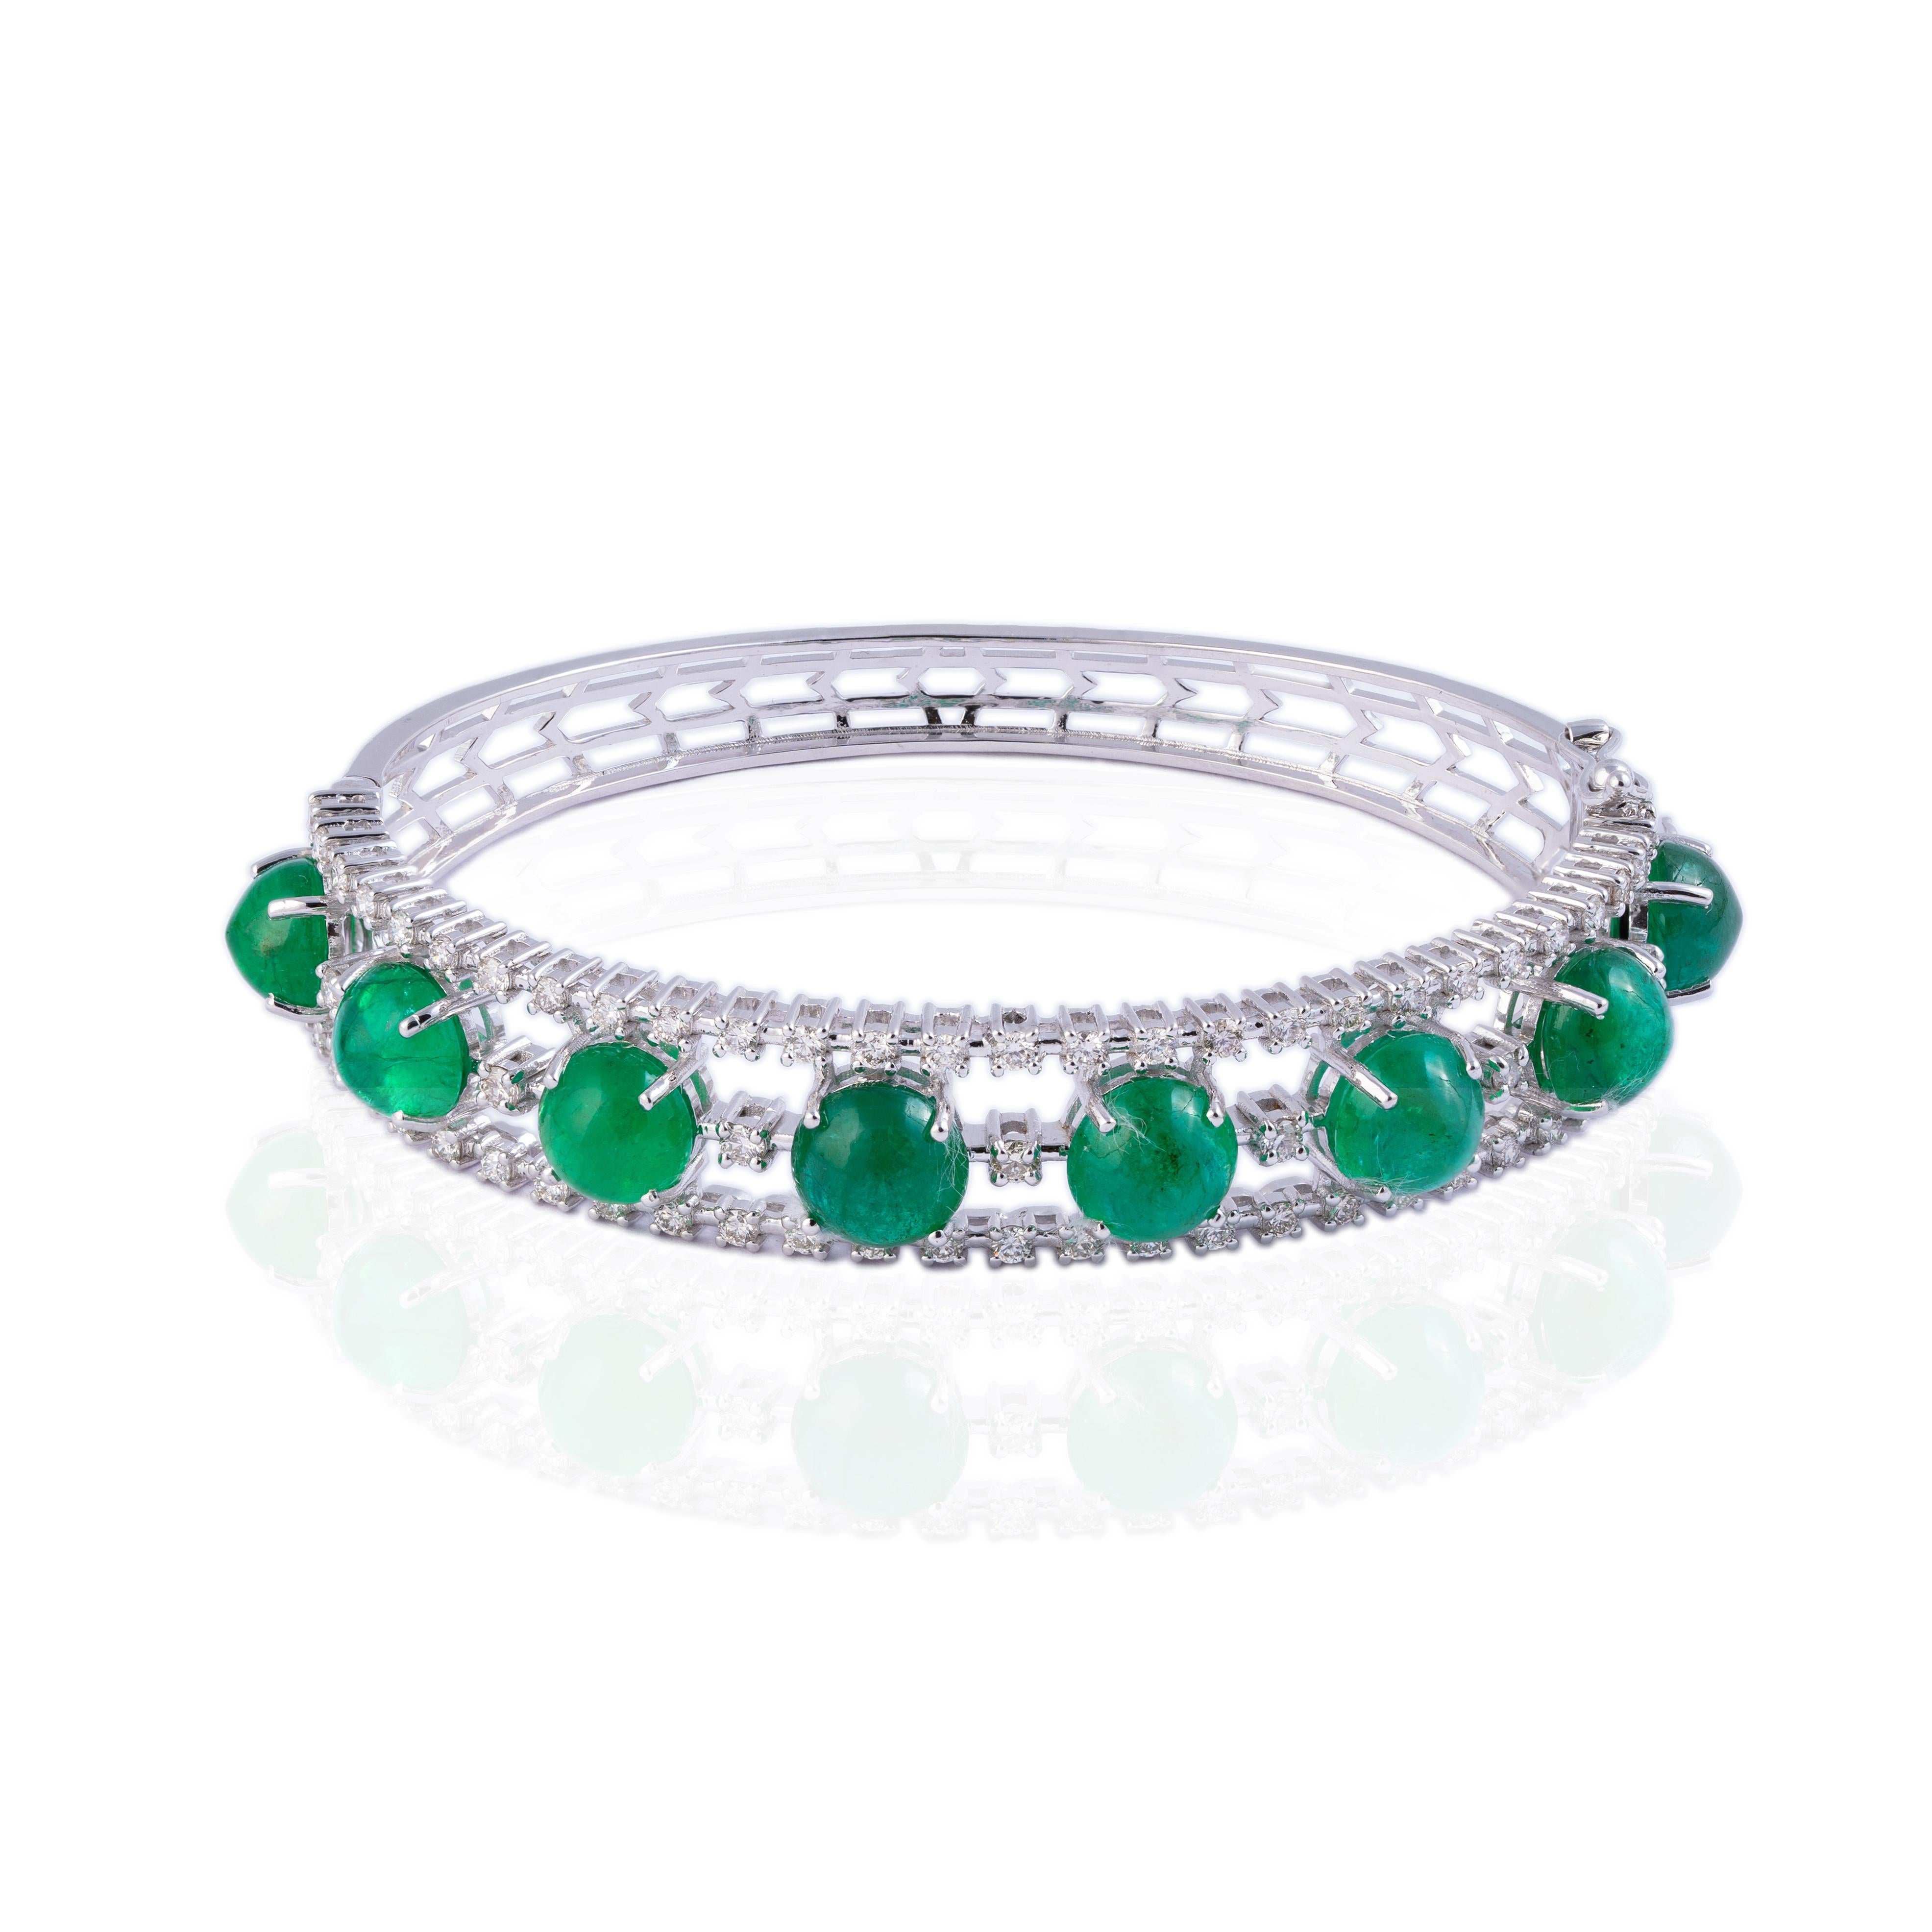 This is a very elegant natural emerald and diamond bracelet in 14k gold. the emeralds are caboshans of very high quality
emeralds: 15.18cts
diamonds : 1.59cts
gold : 17.49gms 
very hard to capture the true color and luster of the stone, I have tried